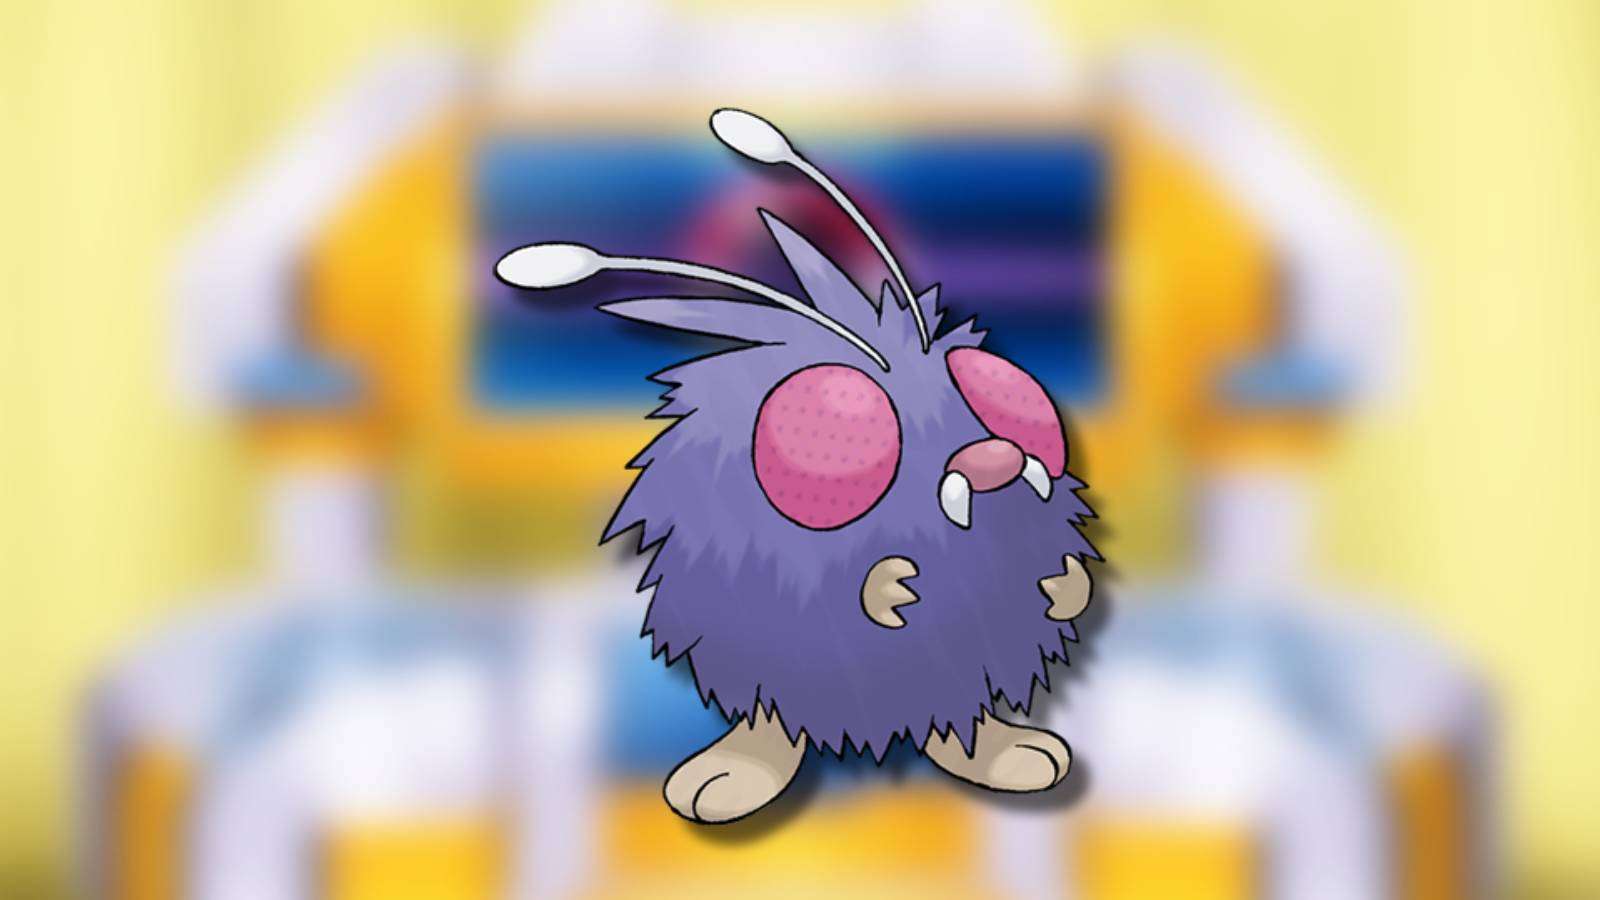 The Pokemon Venonat appears against a blurred background